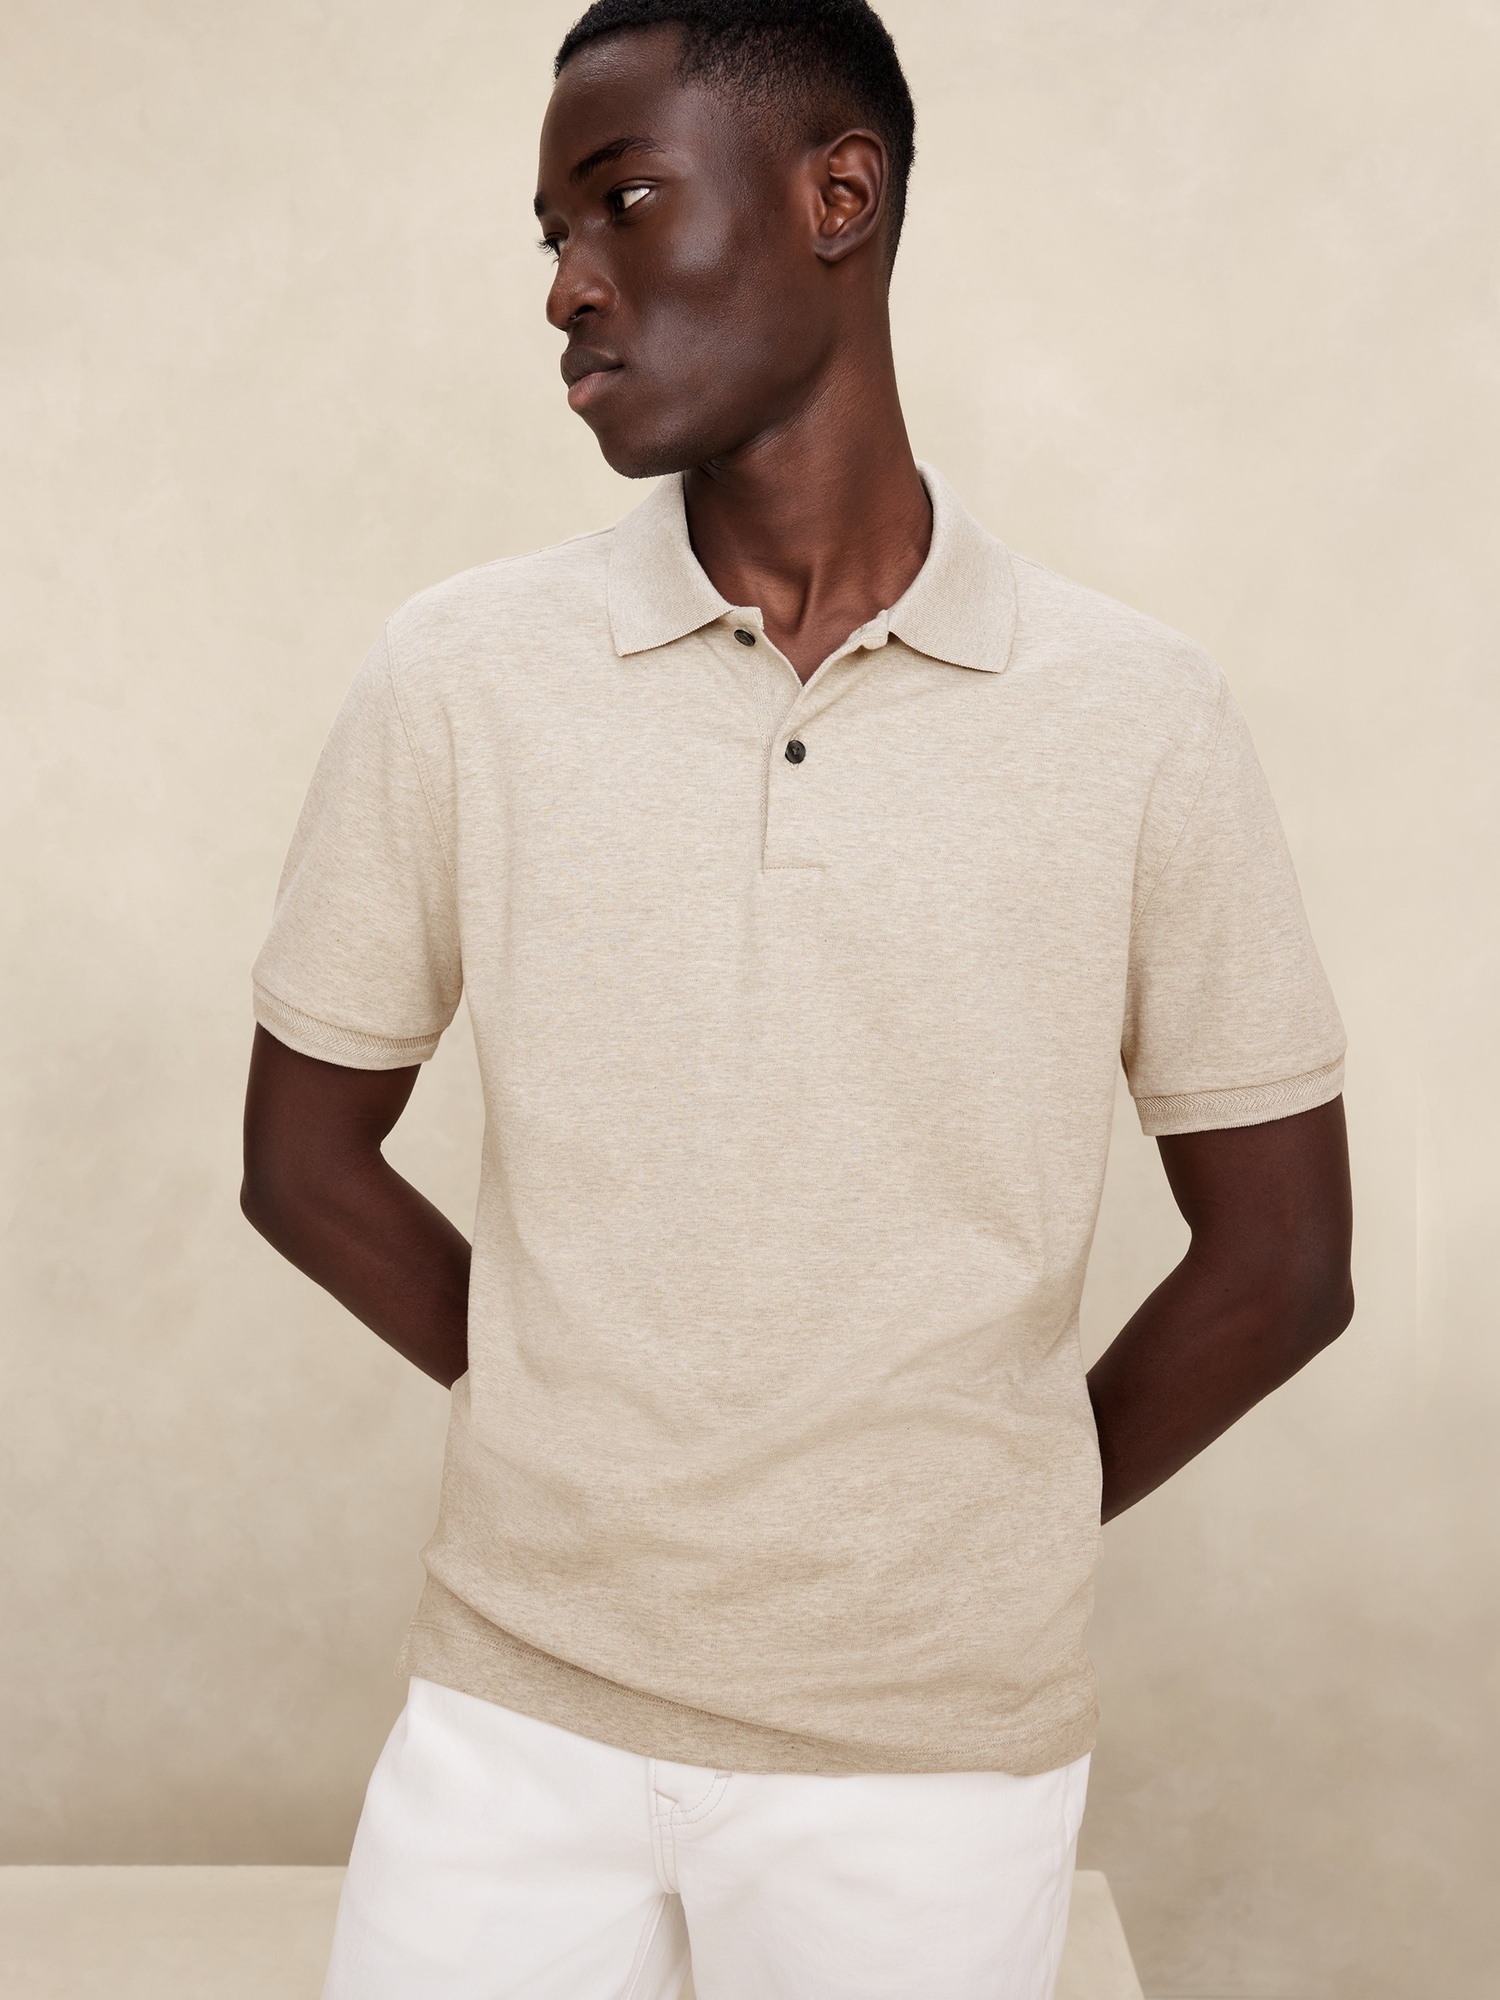 Review: Banana Republic Luxury Touch Polo [4 Years Later]